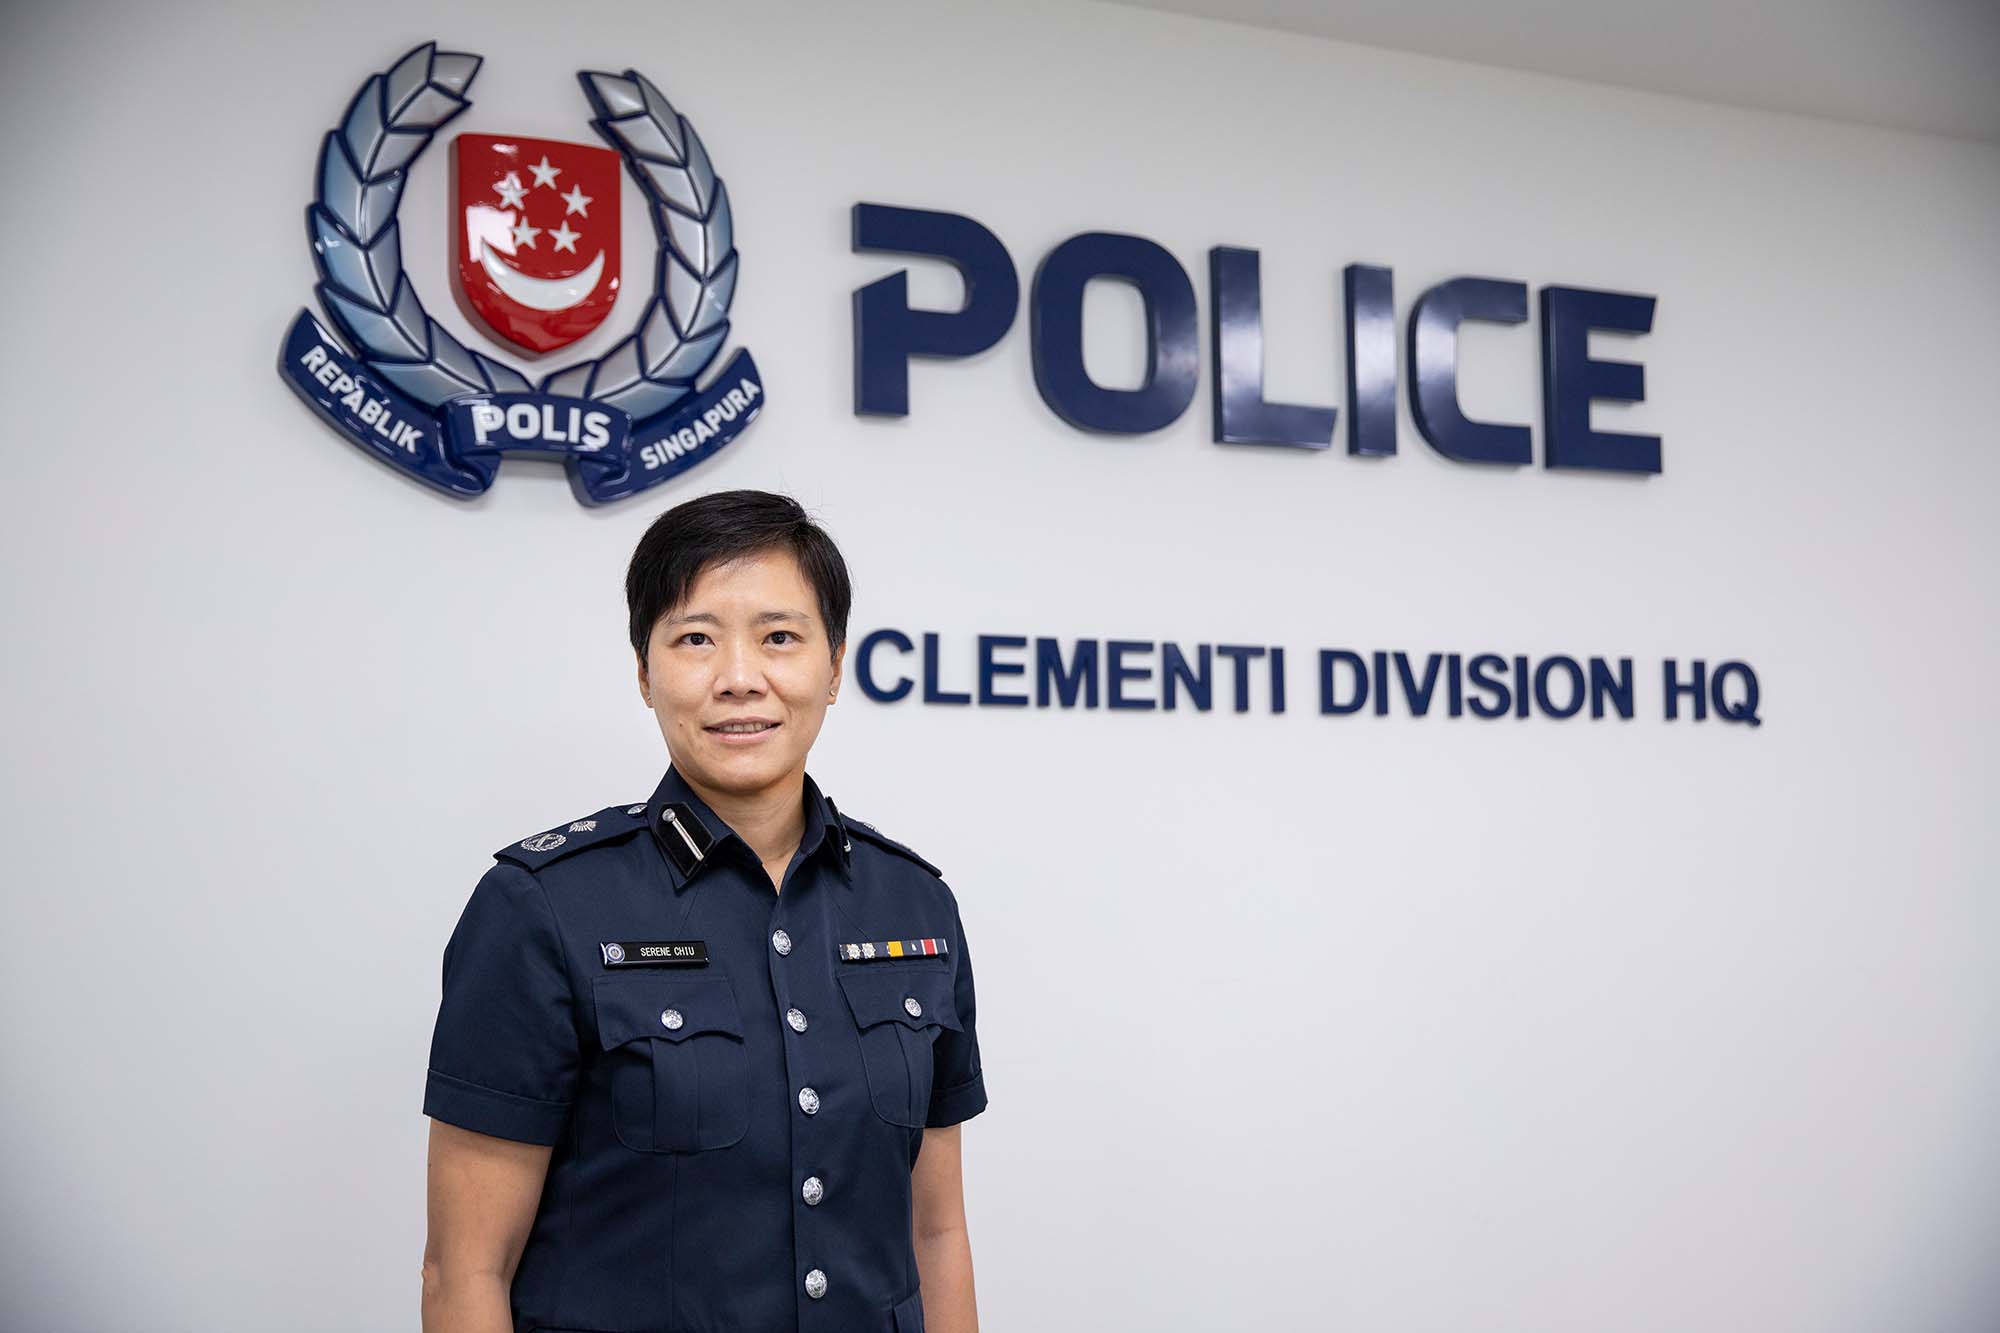 AC Chiu has been in the SPF for 25 years and has served in a wide range of roles including investigations; operations; frontline policing; resource management; public communications; and policy and planning. PHOTO: SPF